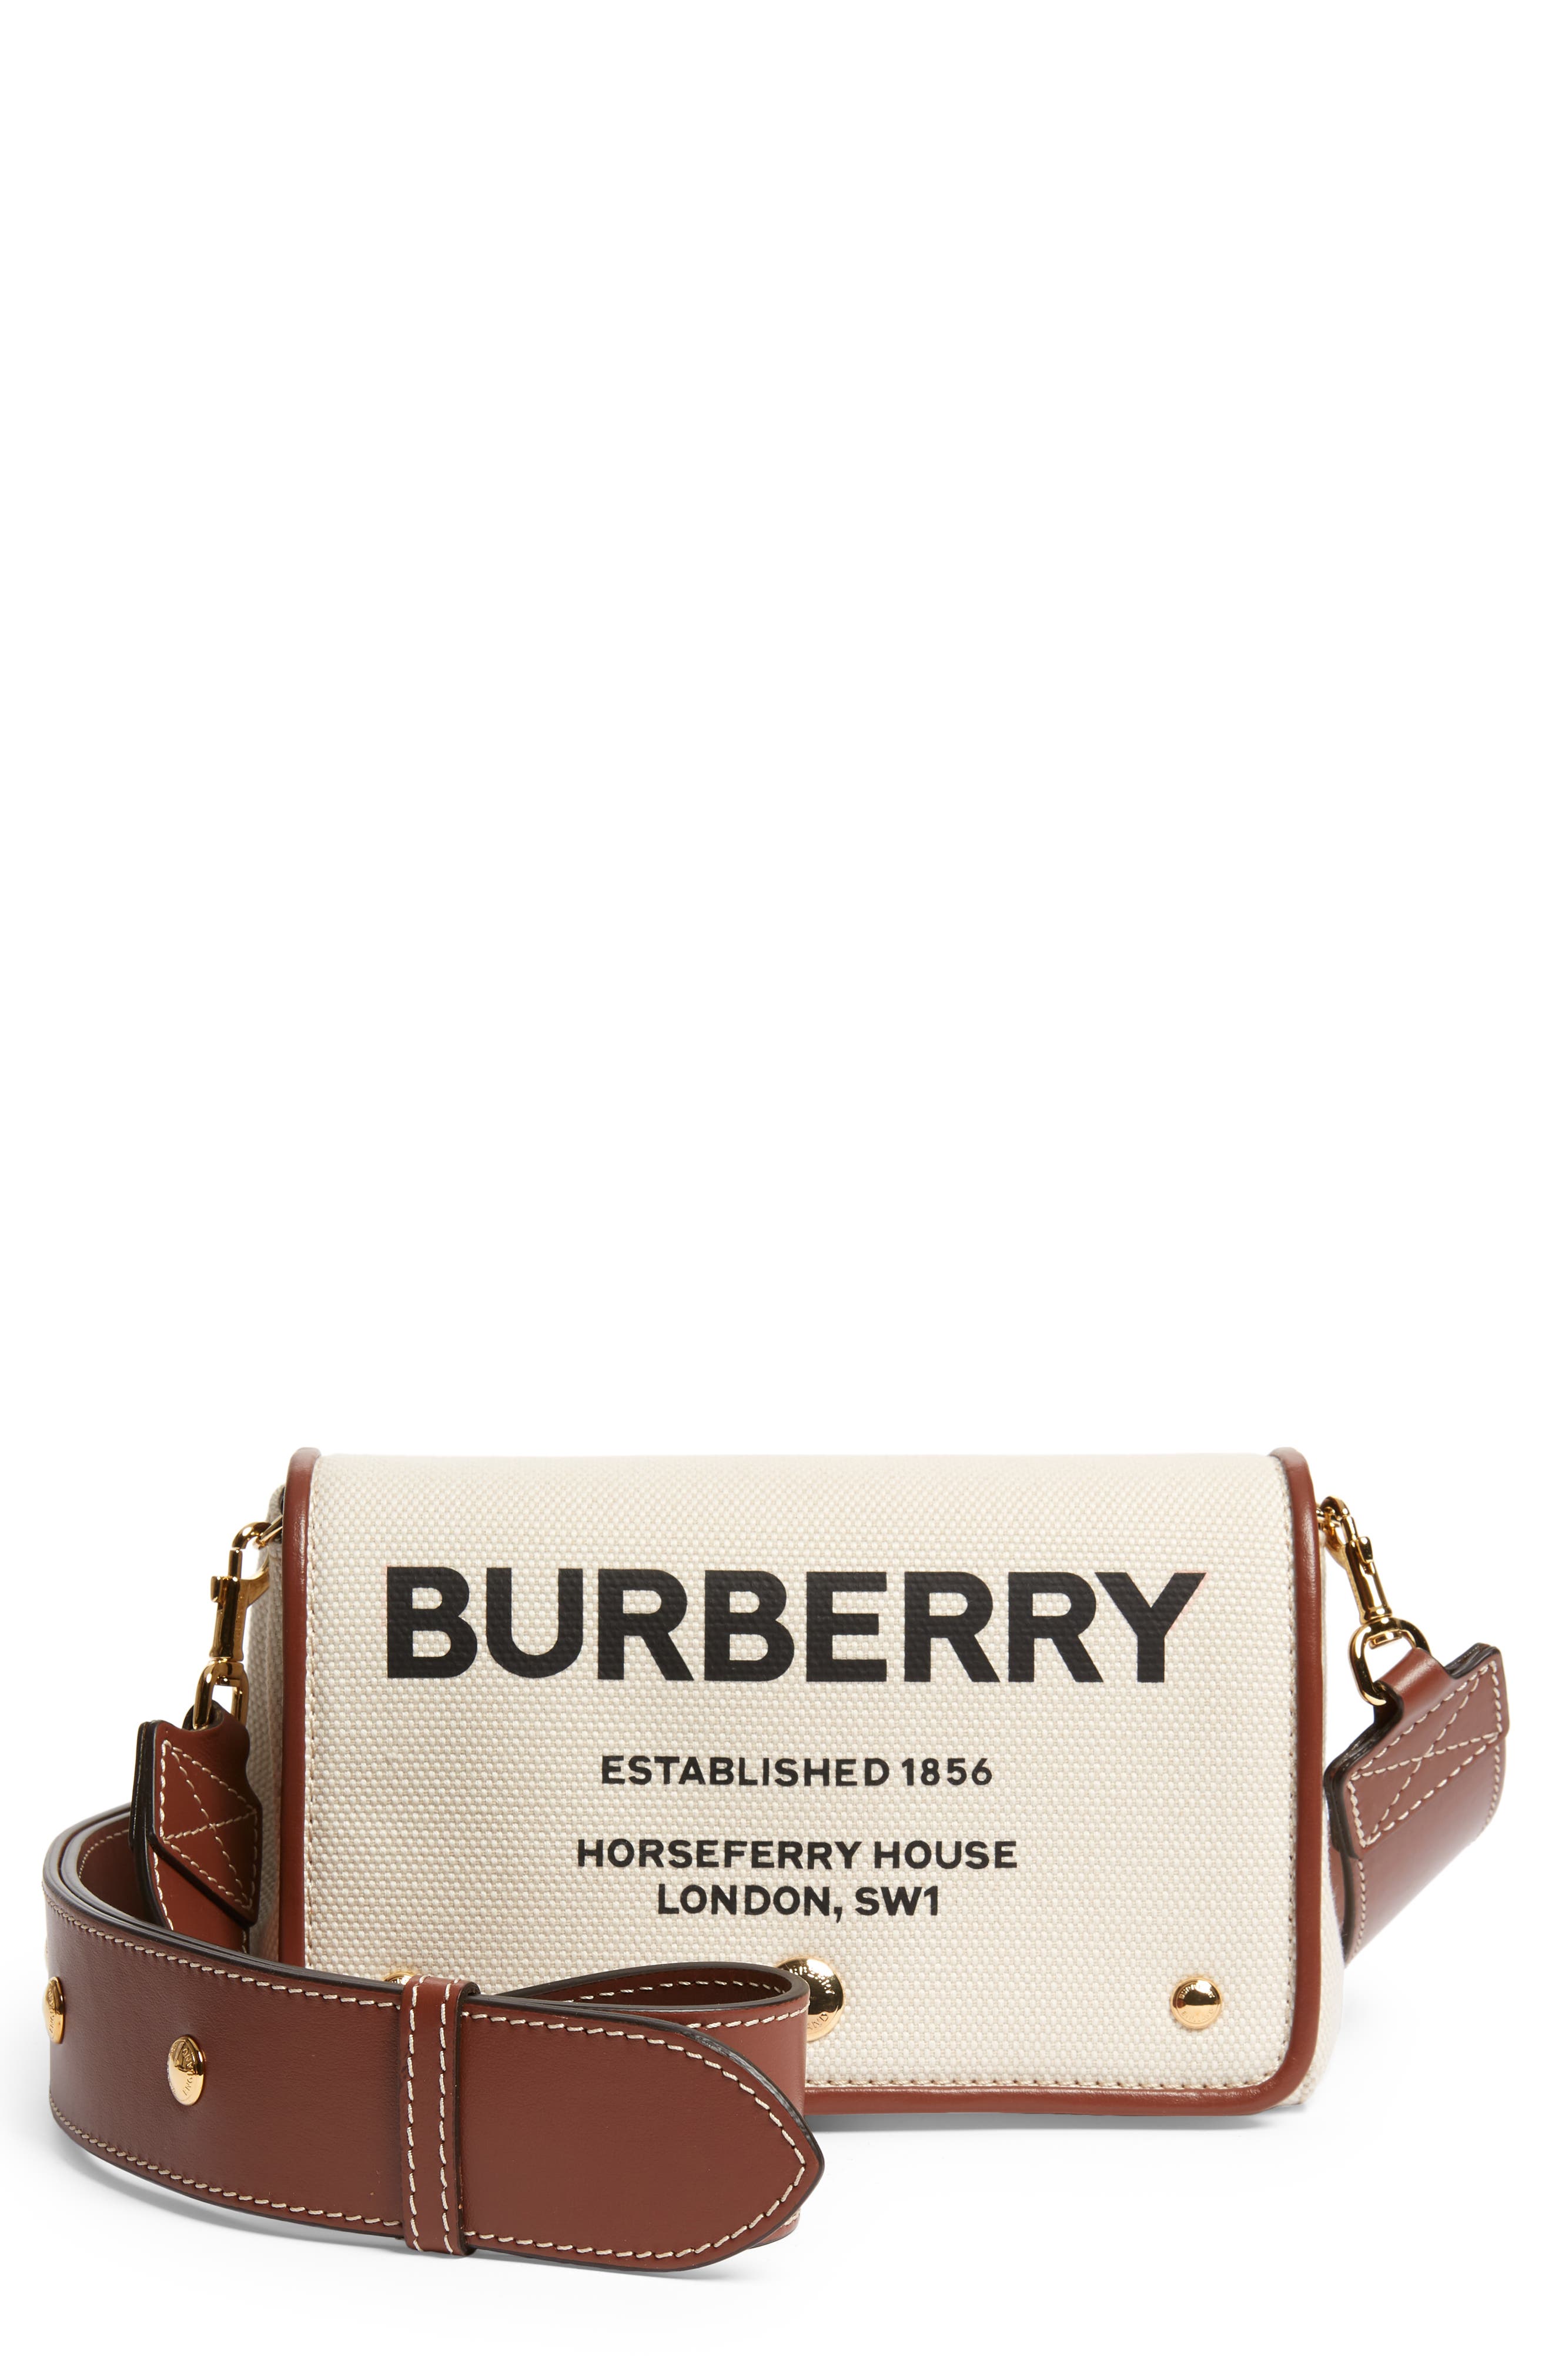 Burberry Hackberry Horseferry Print Canvas Crossbody Bag in White /Tan at Nordstrom